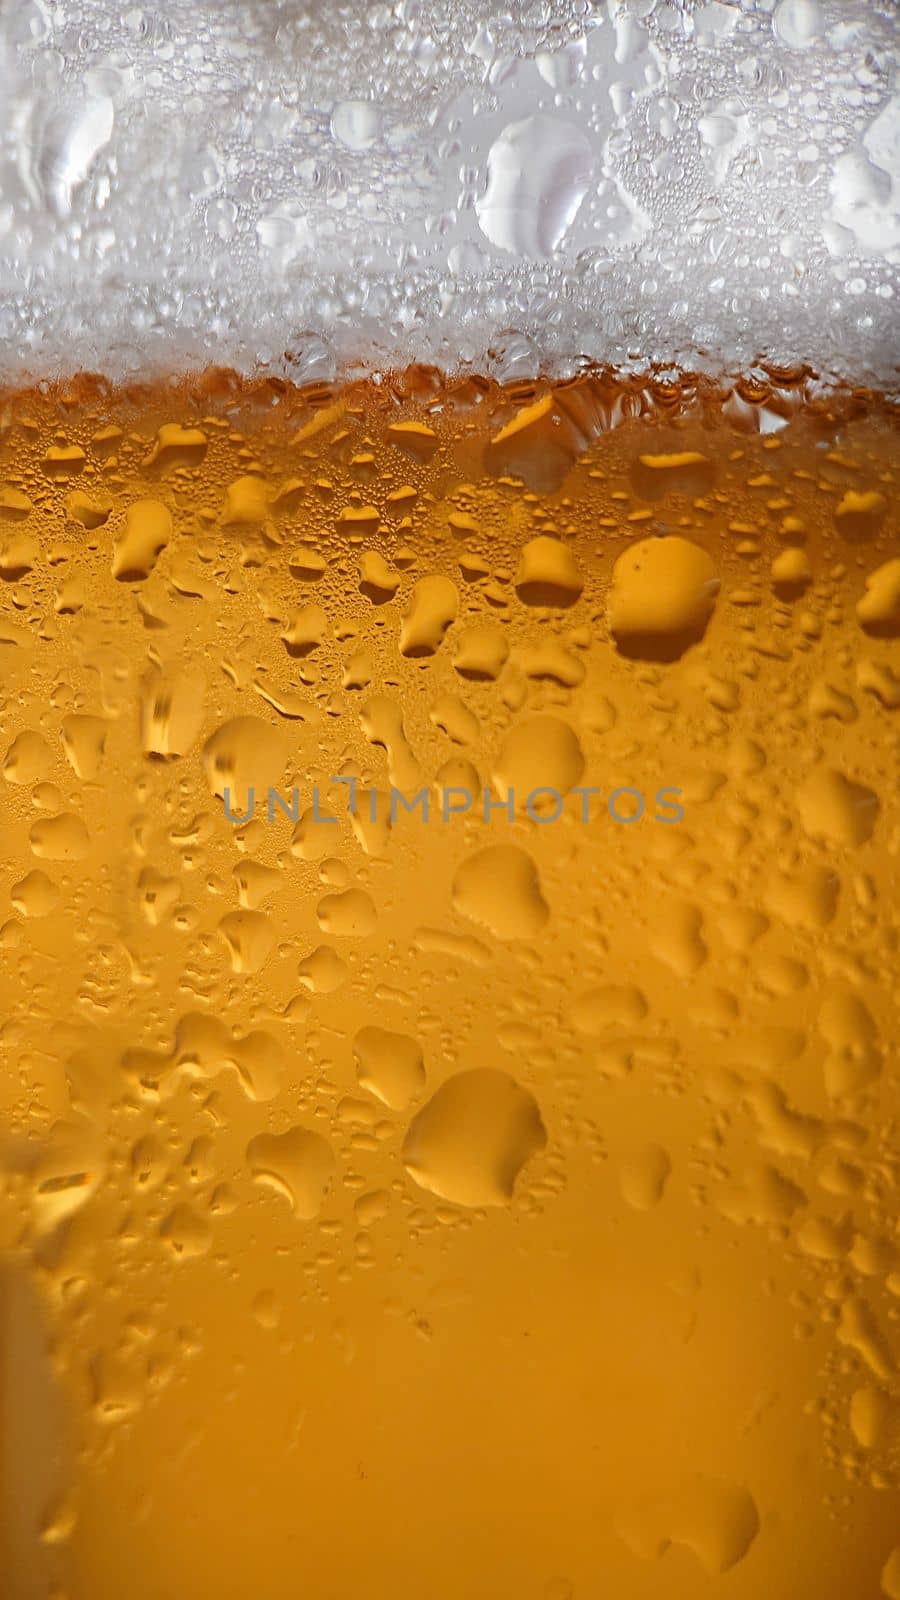 Macrophotography.Drops of condensation on a frothy beer chilled glass.Texture or background